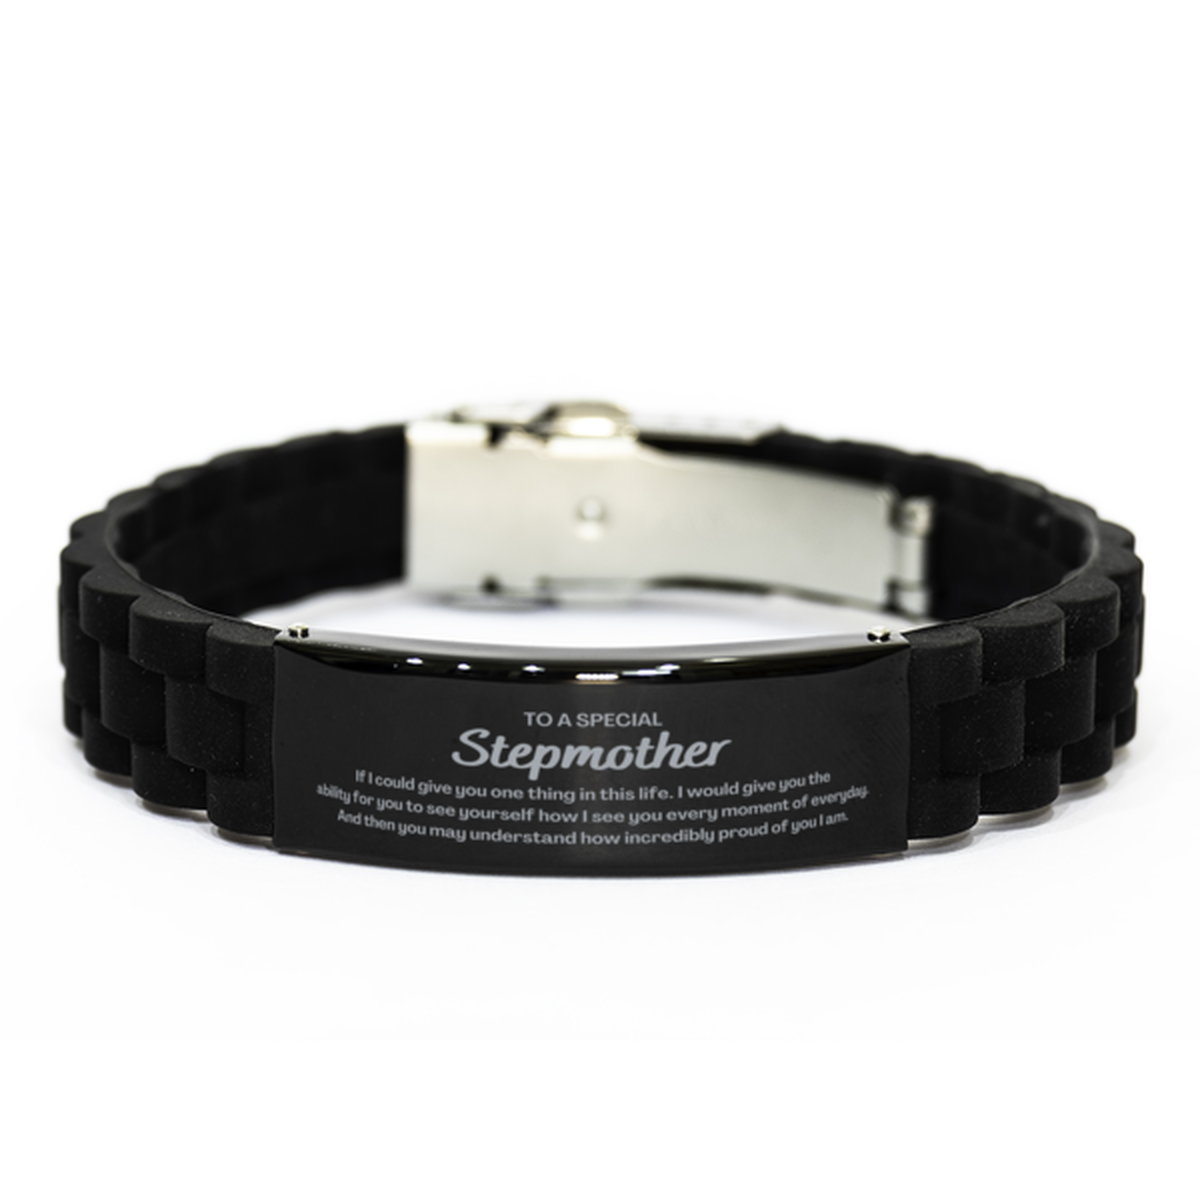 To My Stepmother Black Glidelock Clasp Bracelet, Gifts For Stepmother Engraved, Inspirational Gifts for Christmas Birthday, Epic Gifts for Stepmother To A Special Stepmother how incredibly proud of you I am